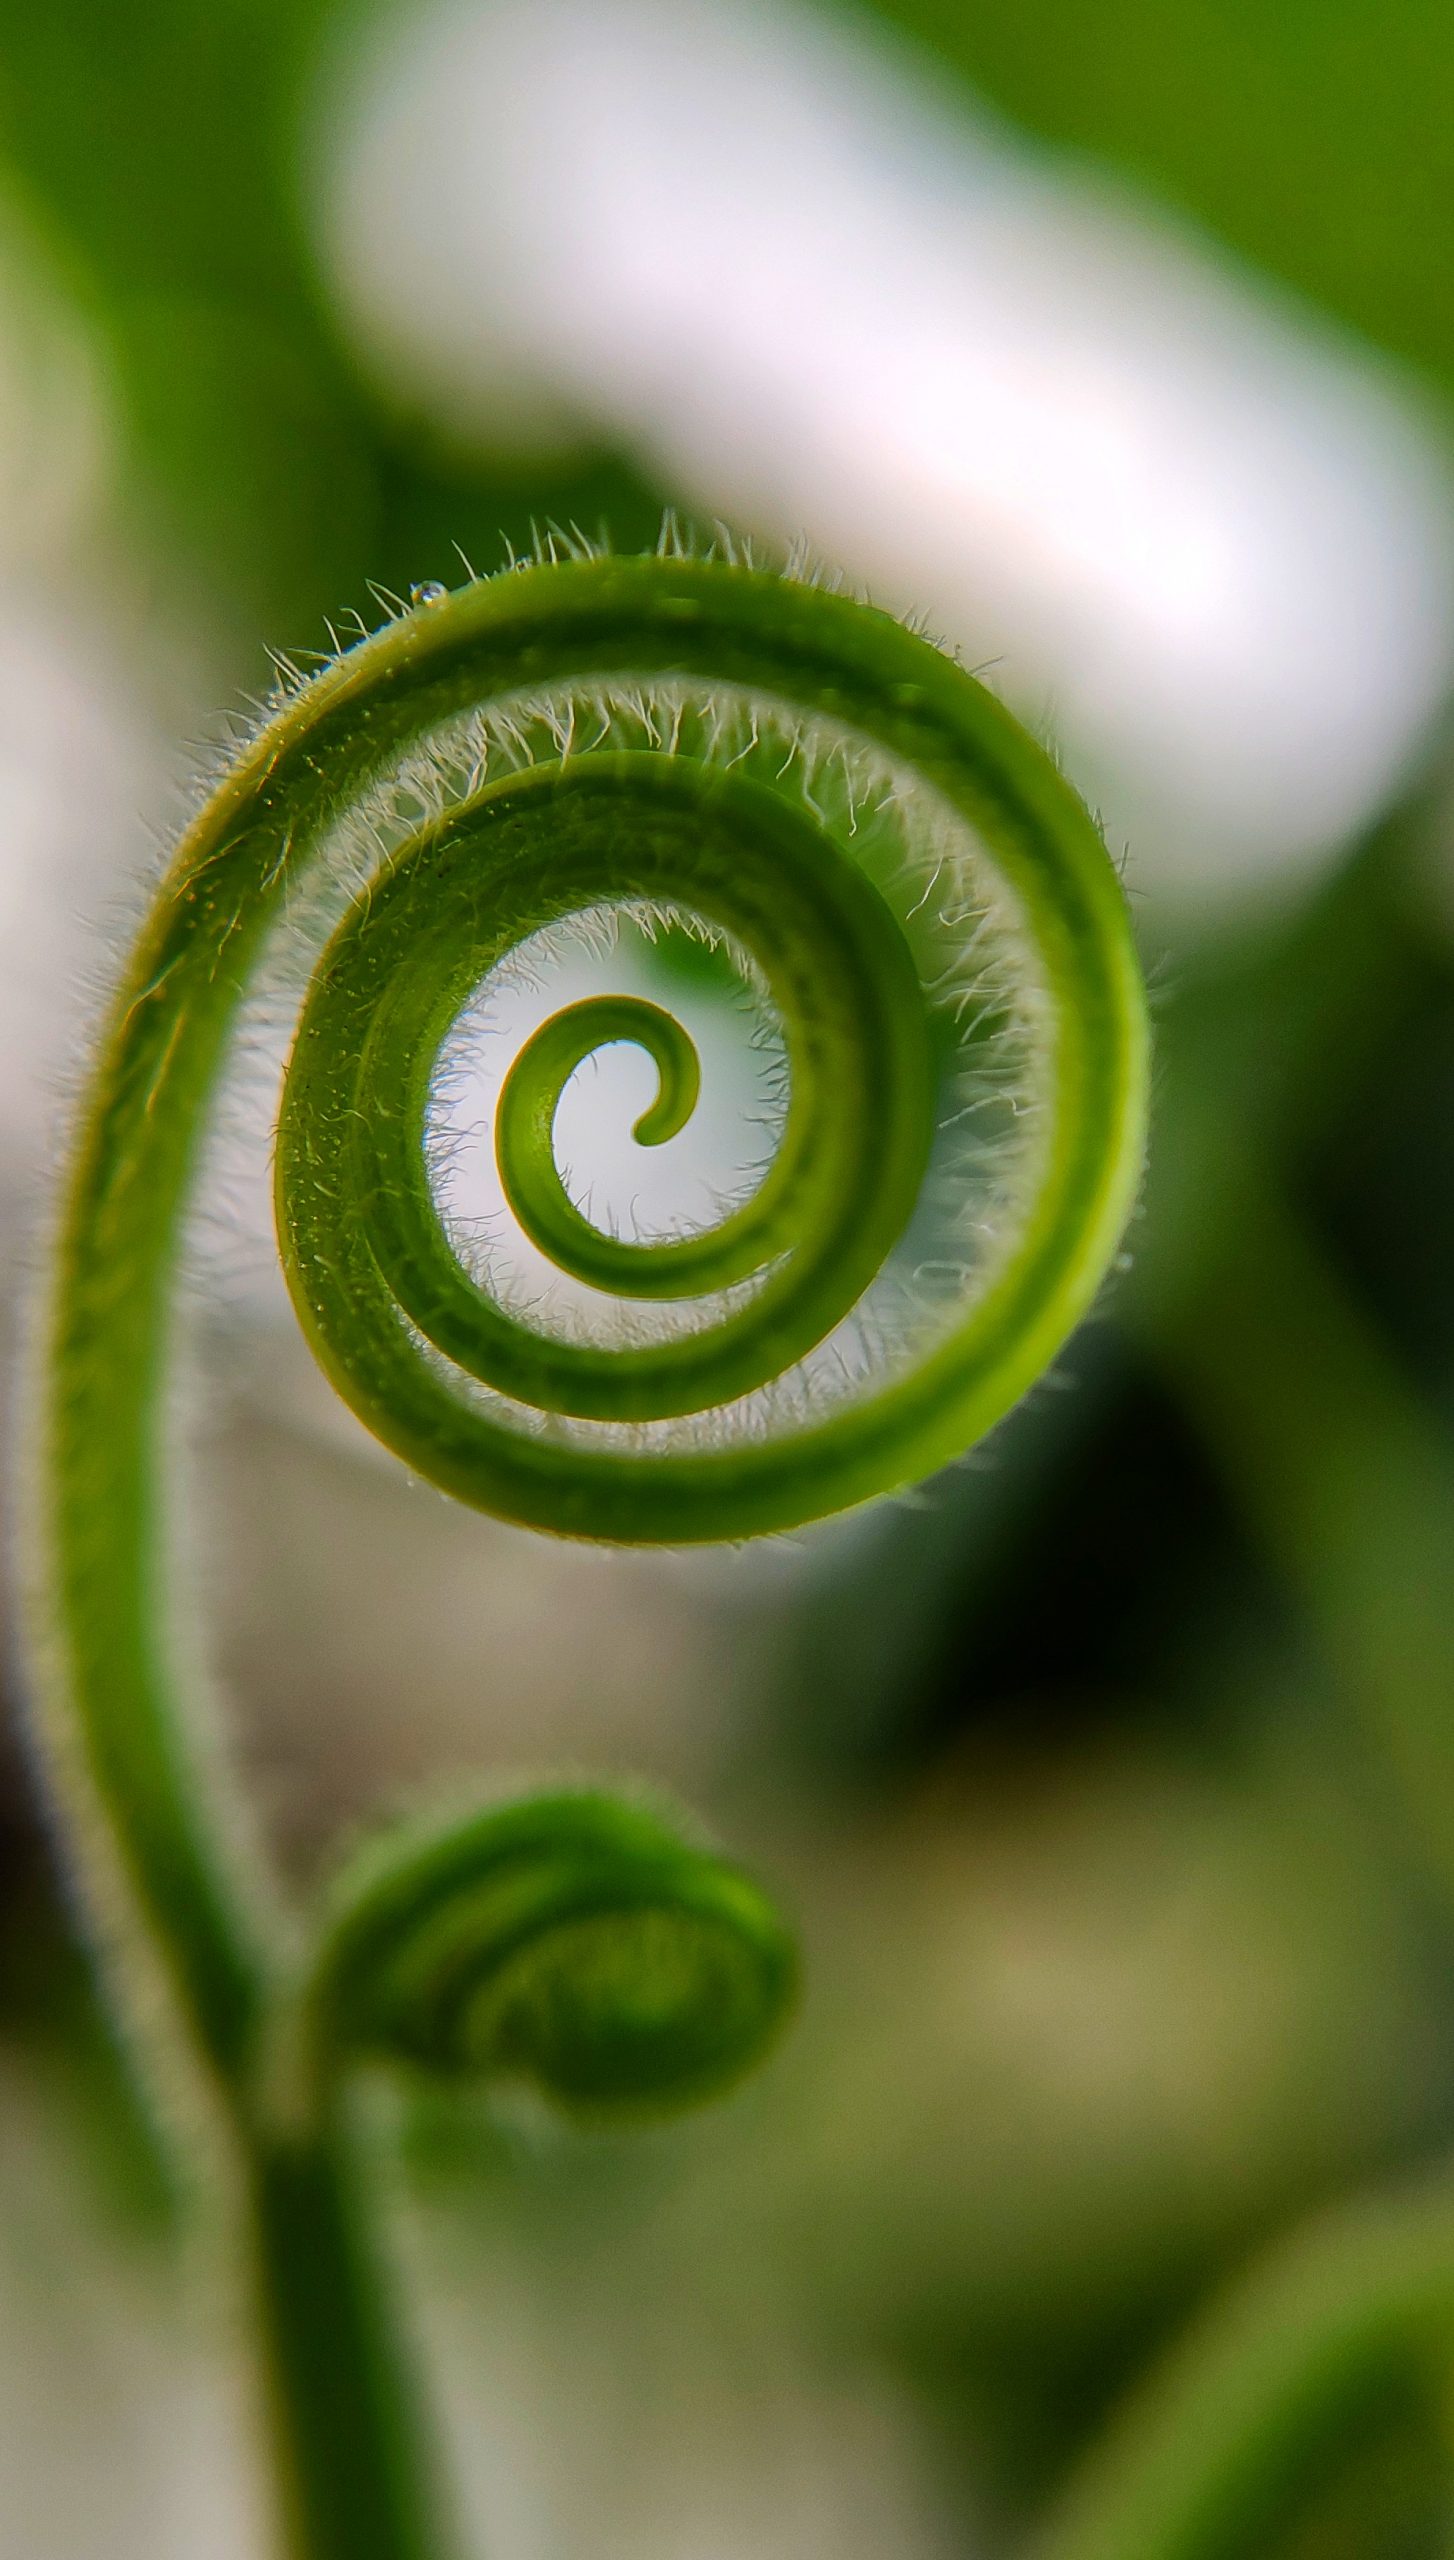 Tendril of plant